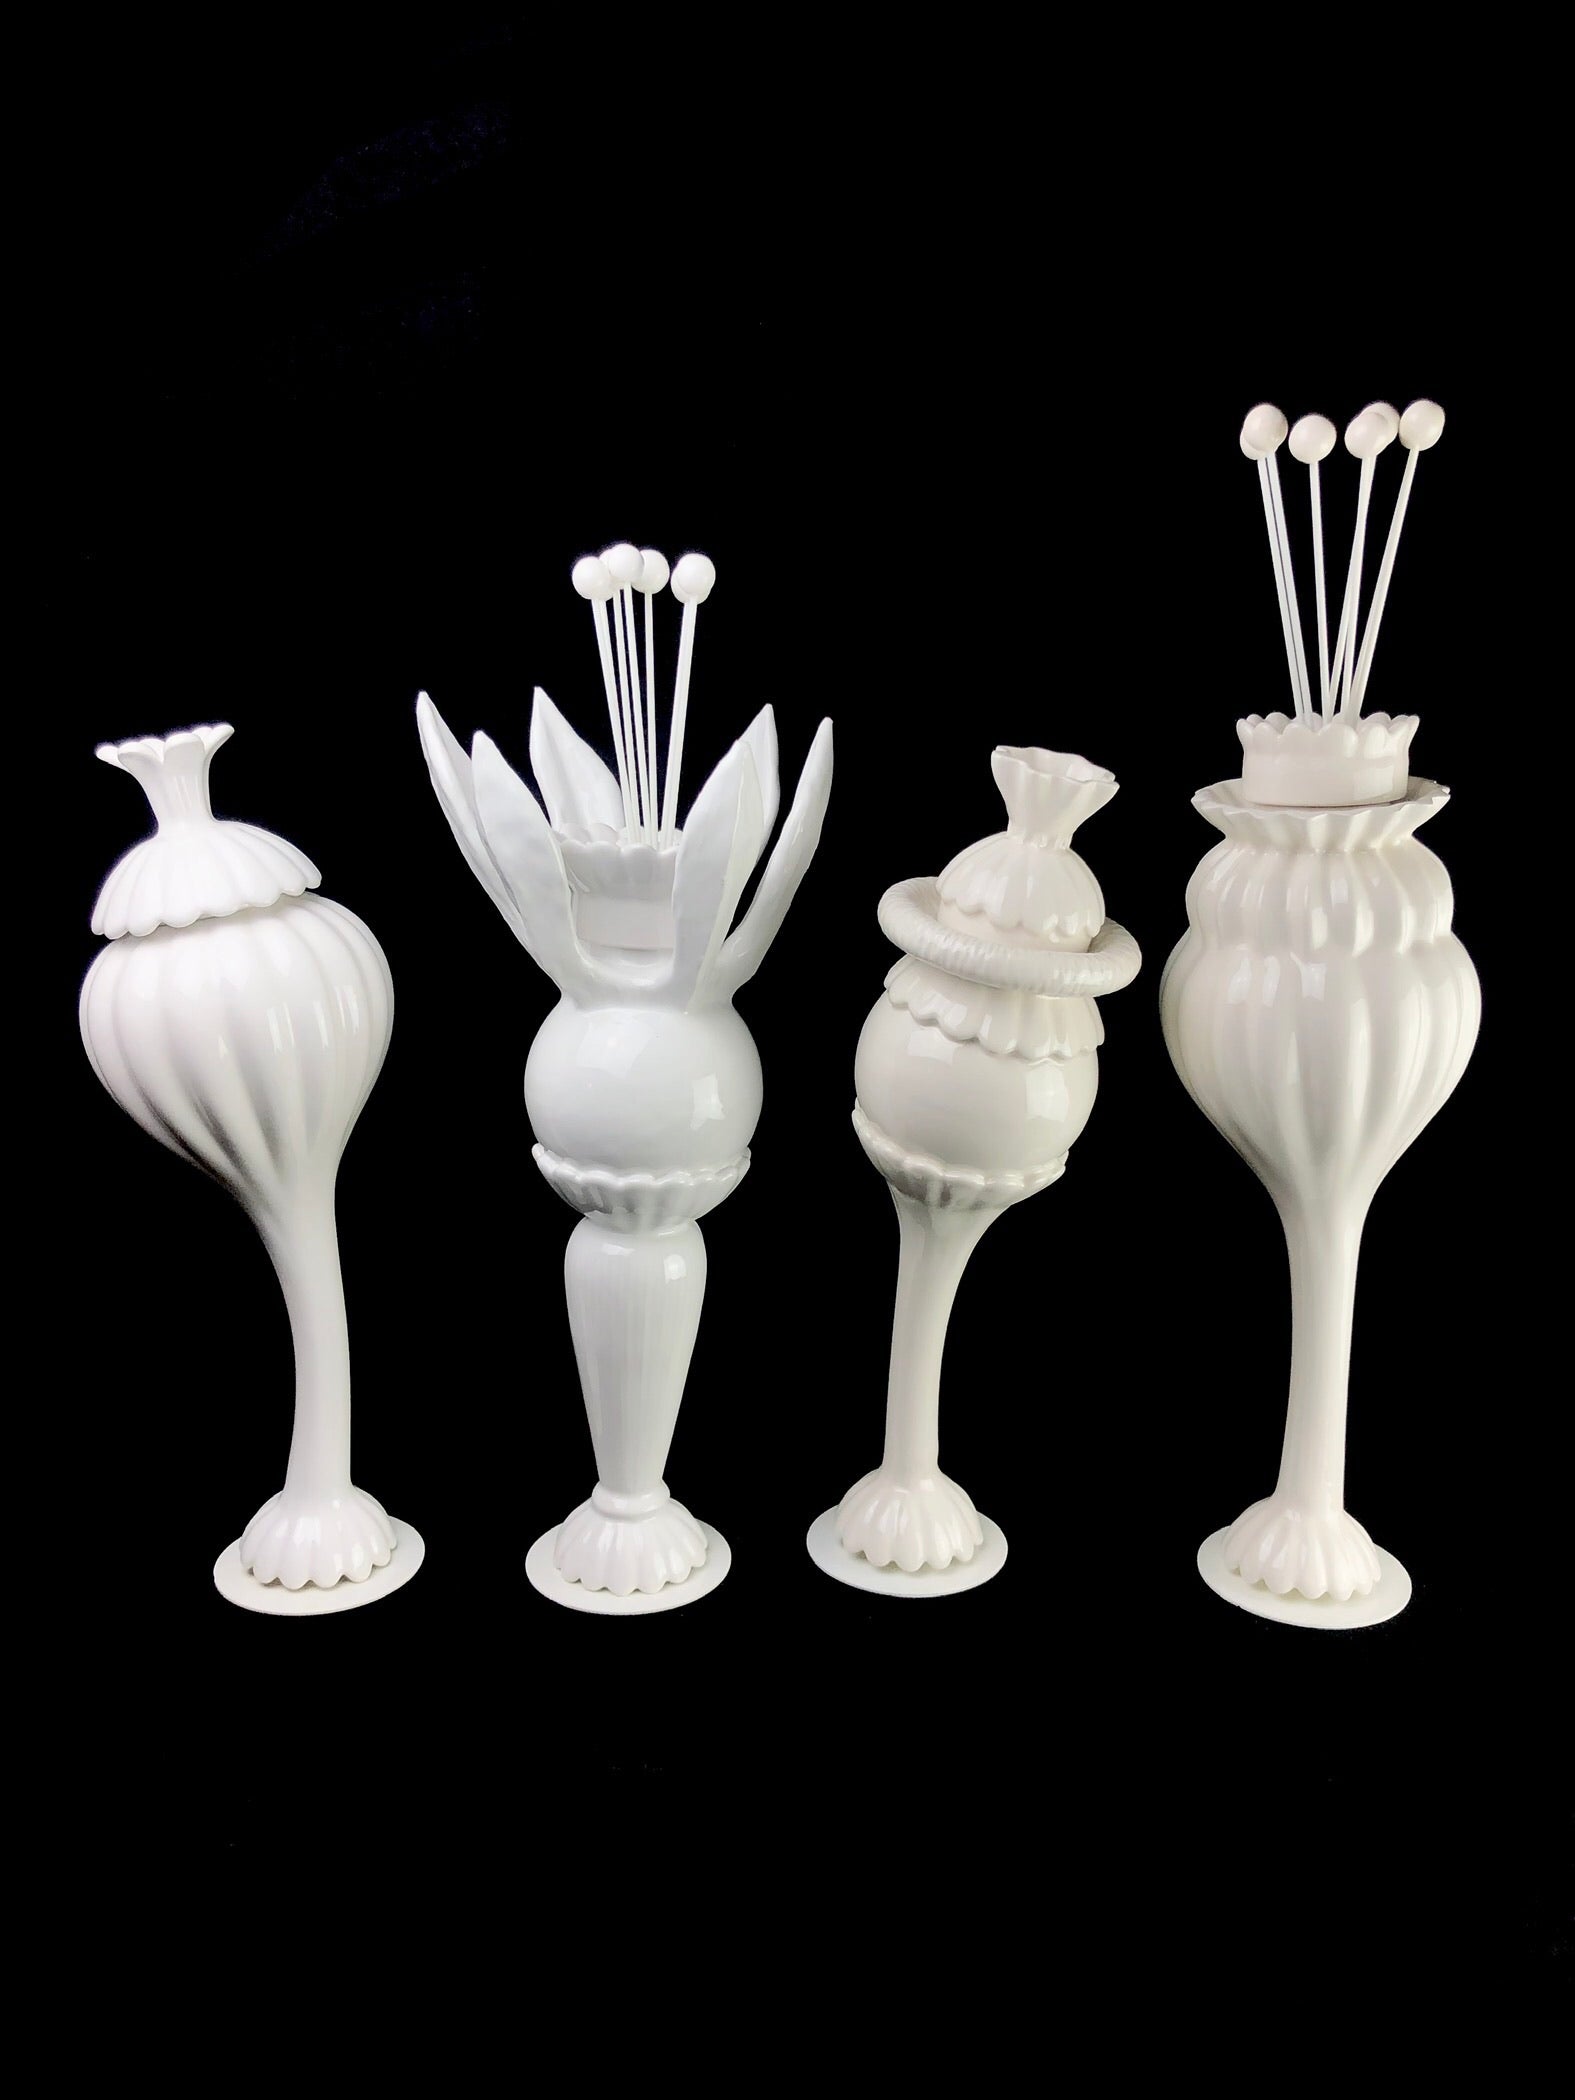 Four different design options of Ceramic Flower Oil Diffusers available